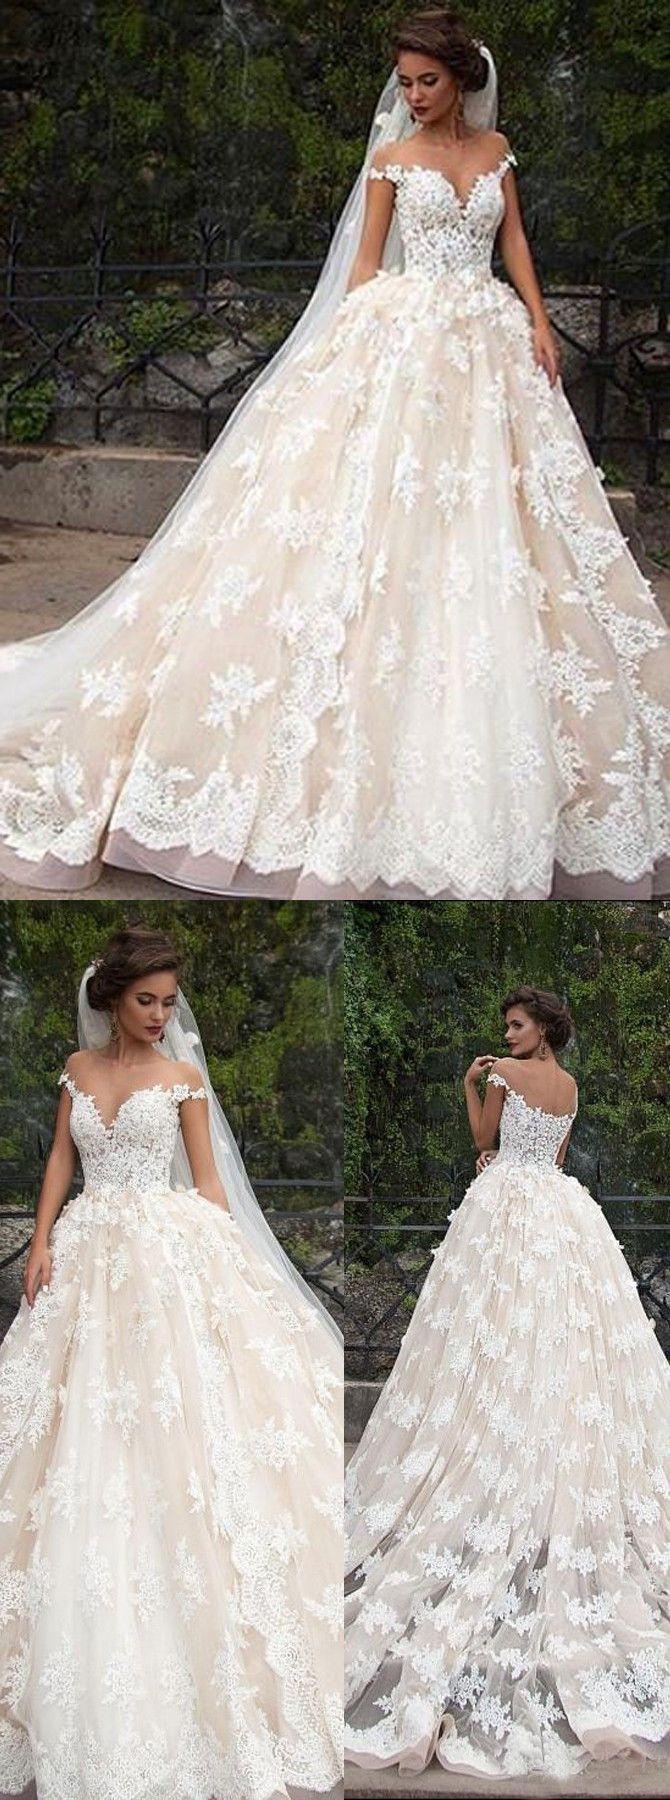 Hochzeit - Glamorous Jewel Cap Sleeves Court Train Wedding Dress With Lace Top